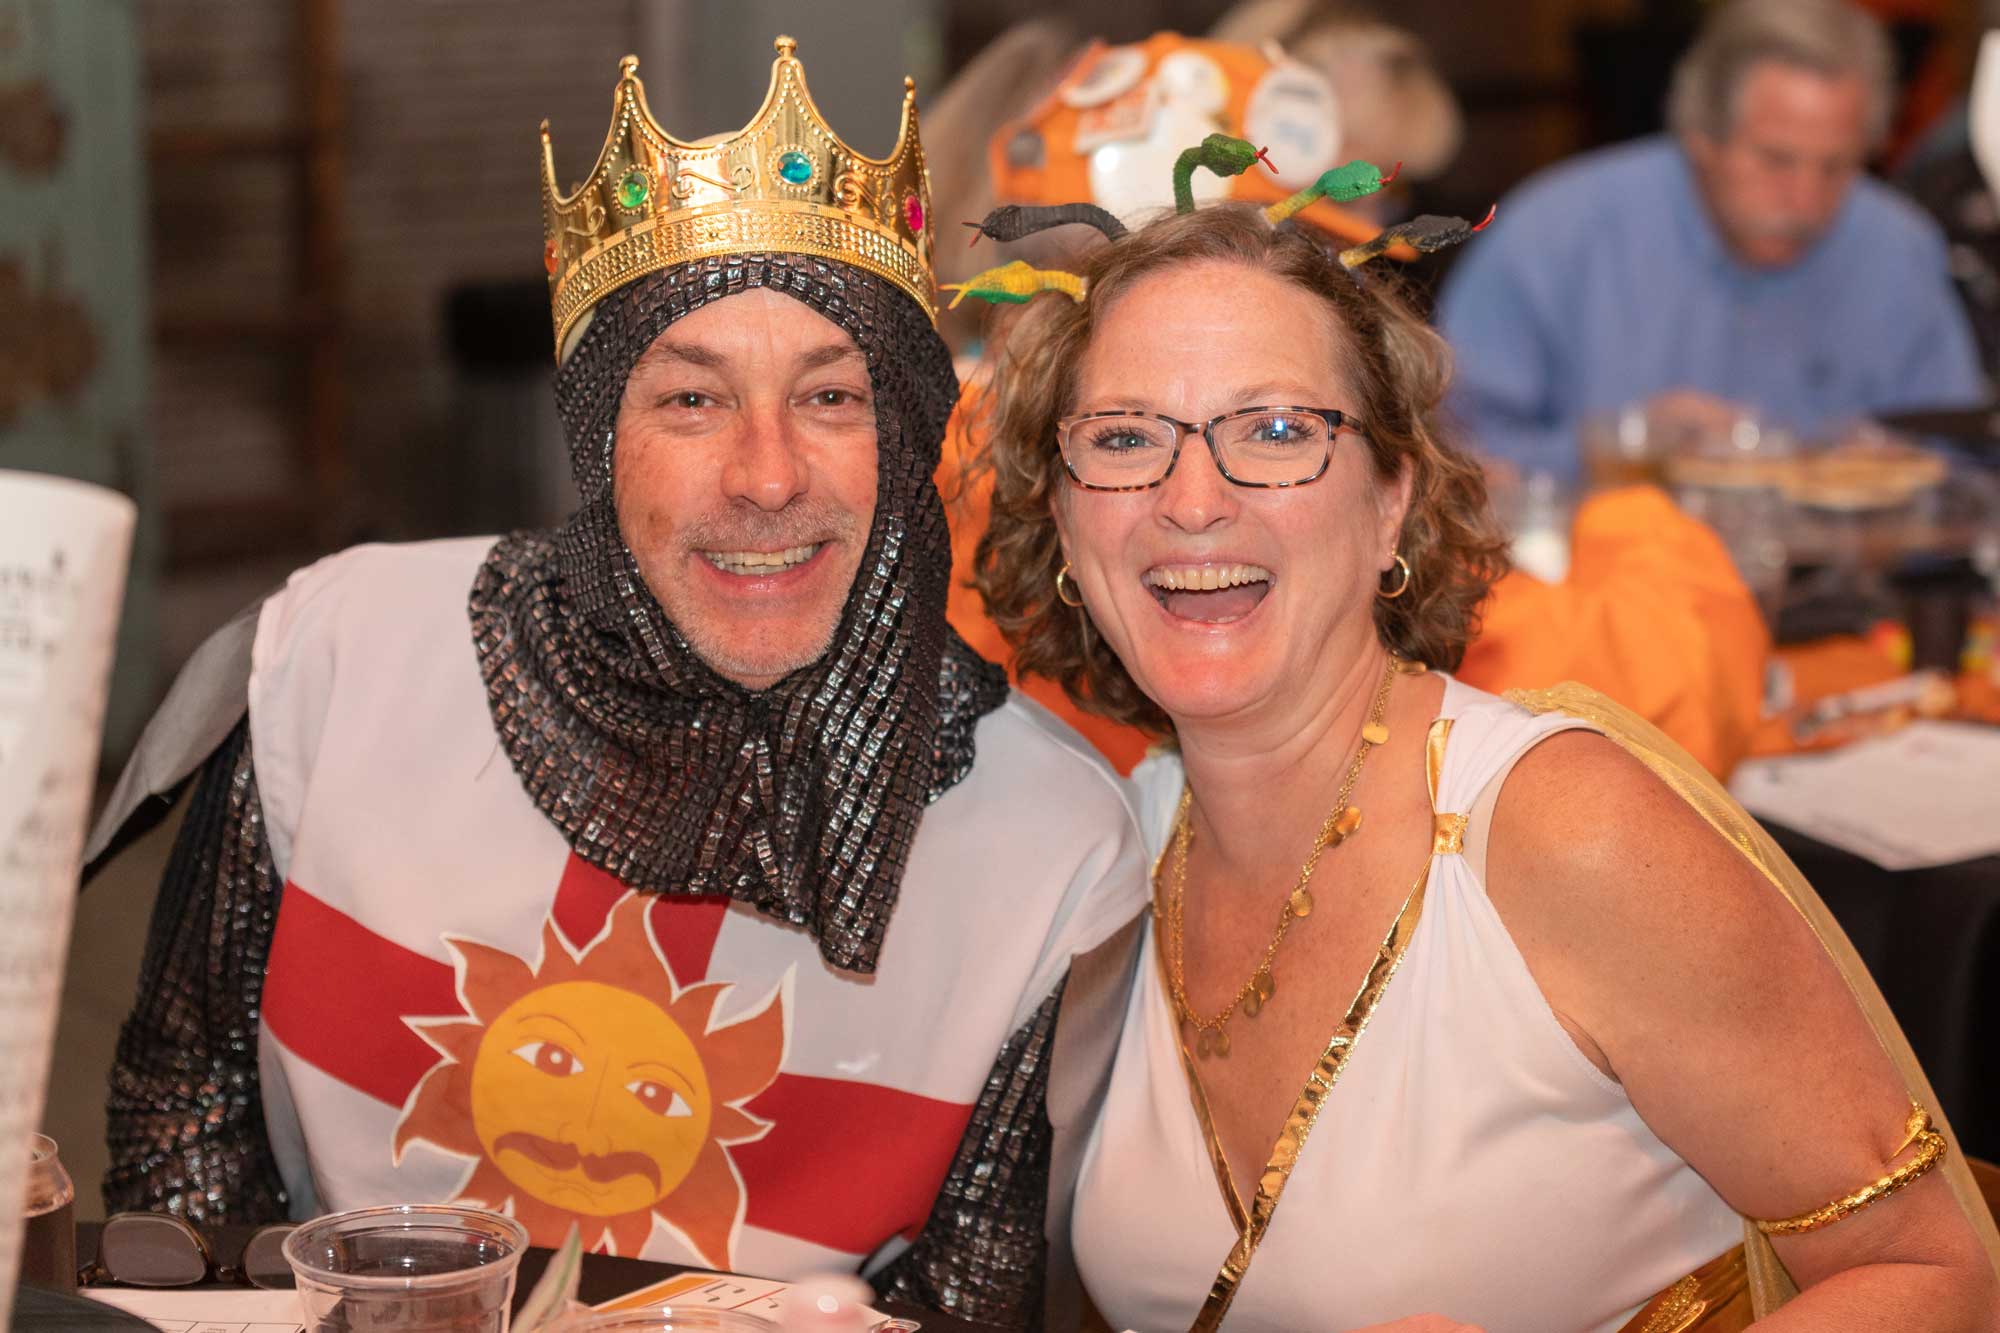 A man and woman dressed as a knight and Medusa pose for a photo.